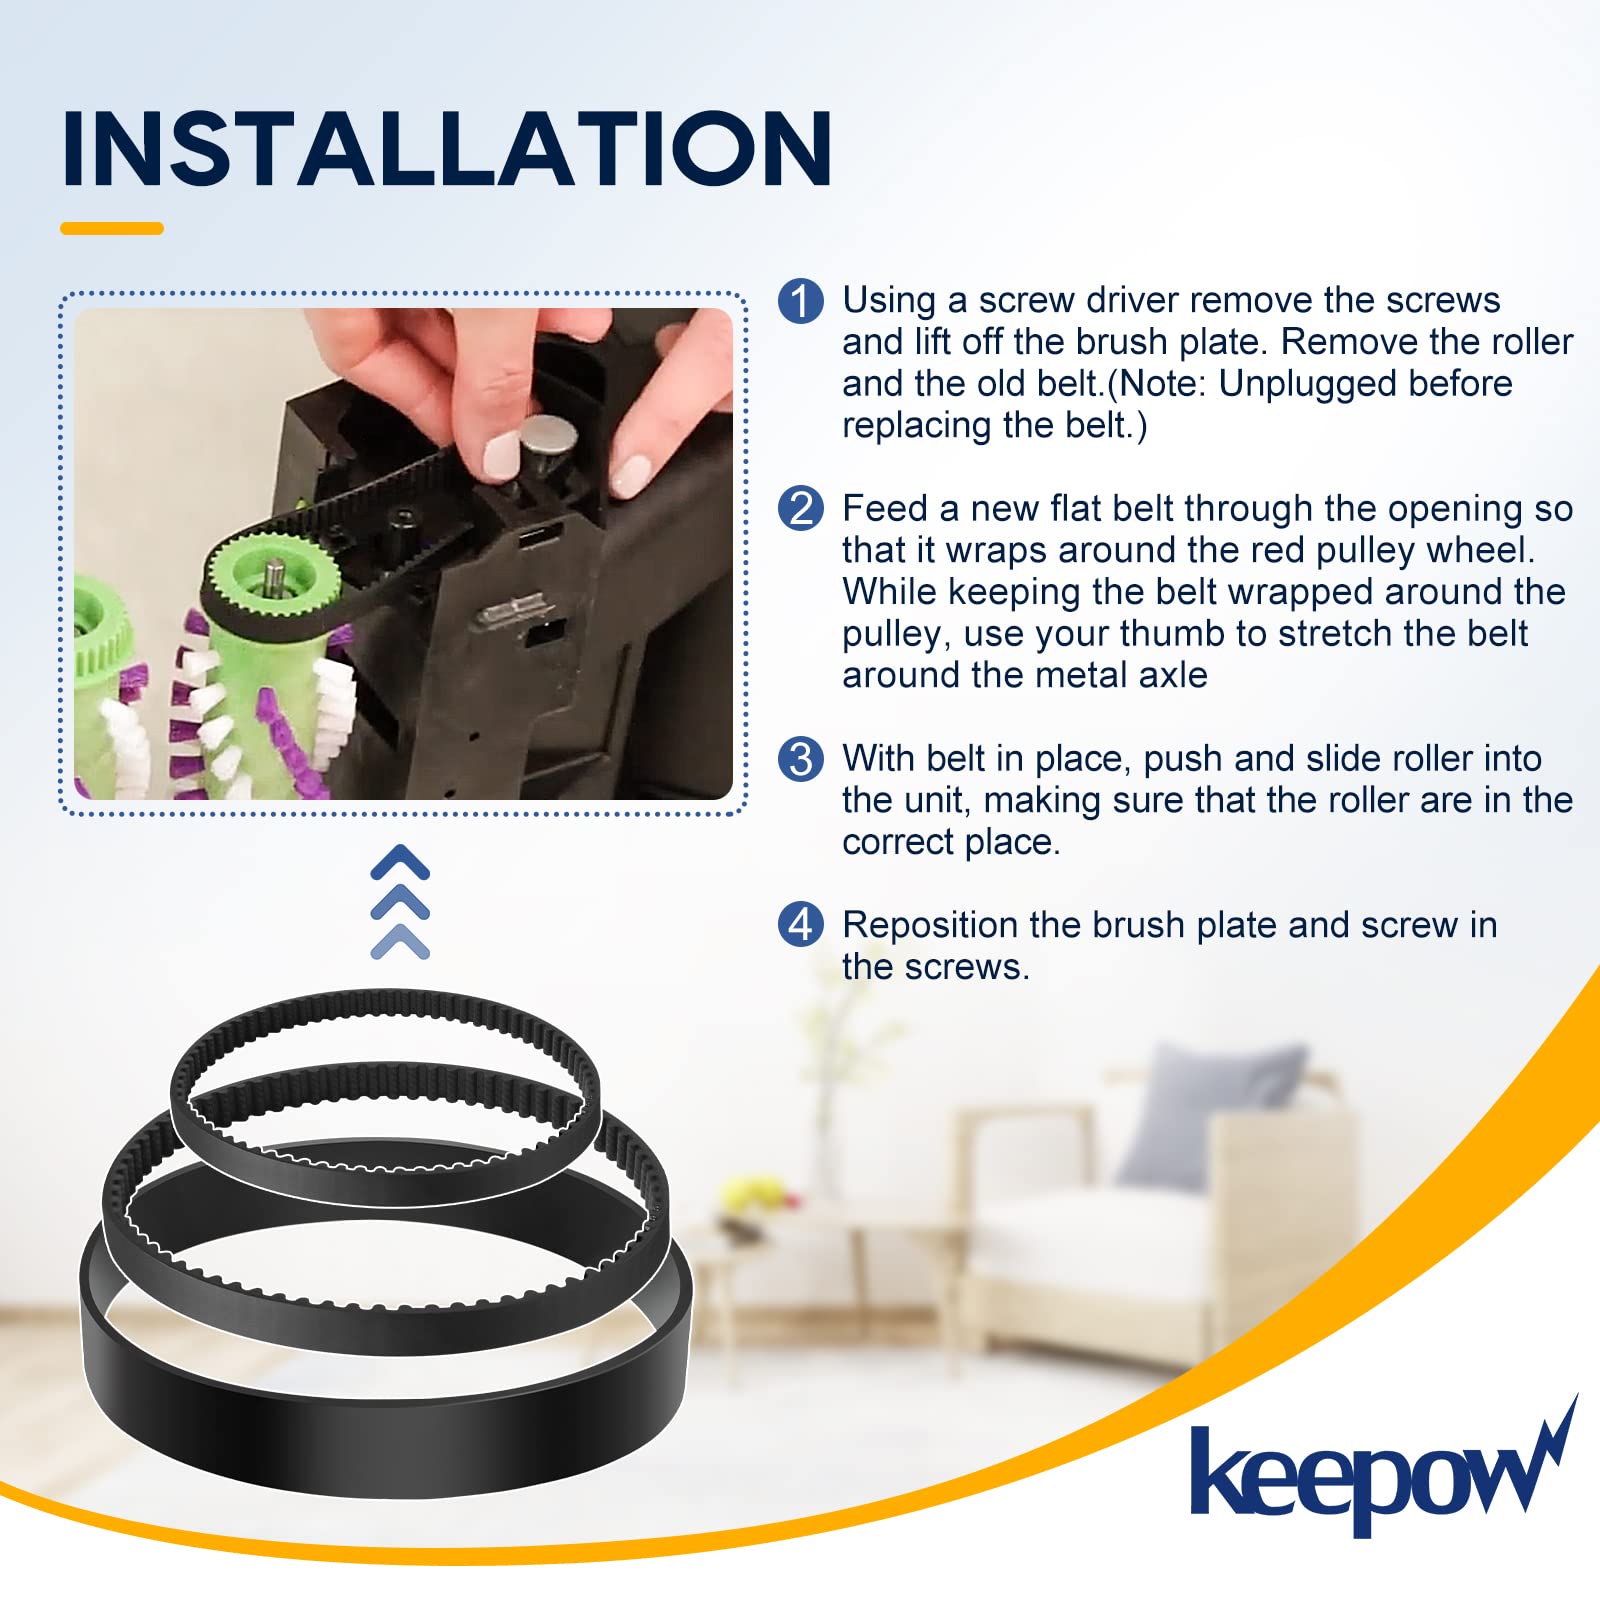 KEEPOW Replacement Belt Set Compatible with Bissell ProHeat 2X Revolution Pet Pro Carpet Cleaner 1986, 1964, 2007, 2007P Series, Part# 1606428 & 1611129 & 1611130